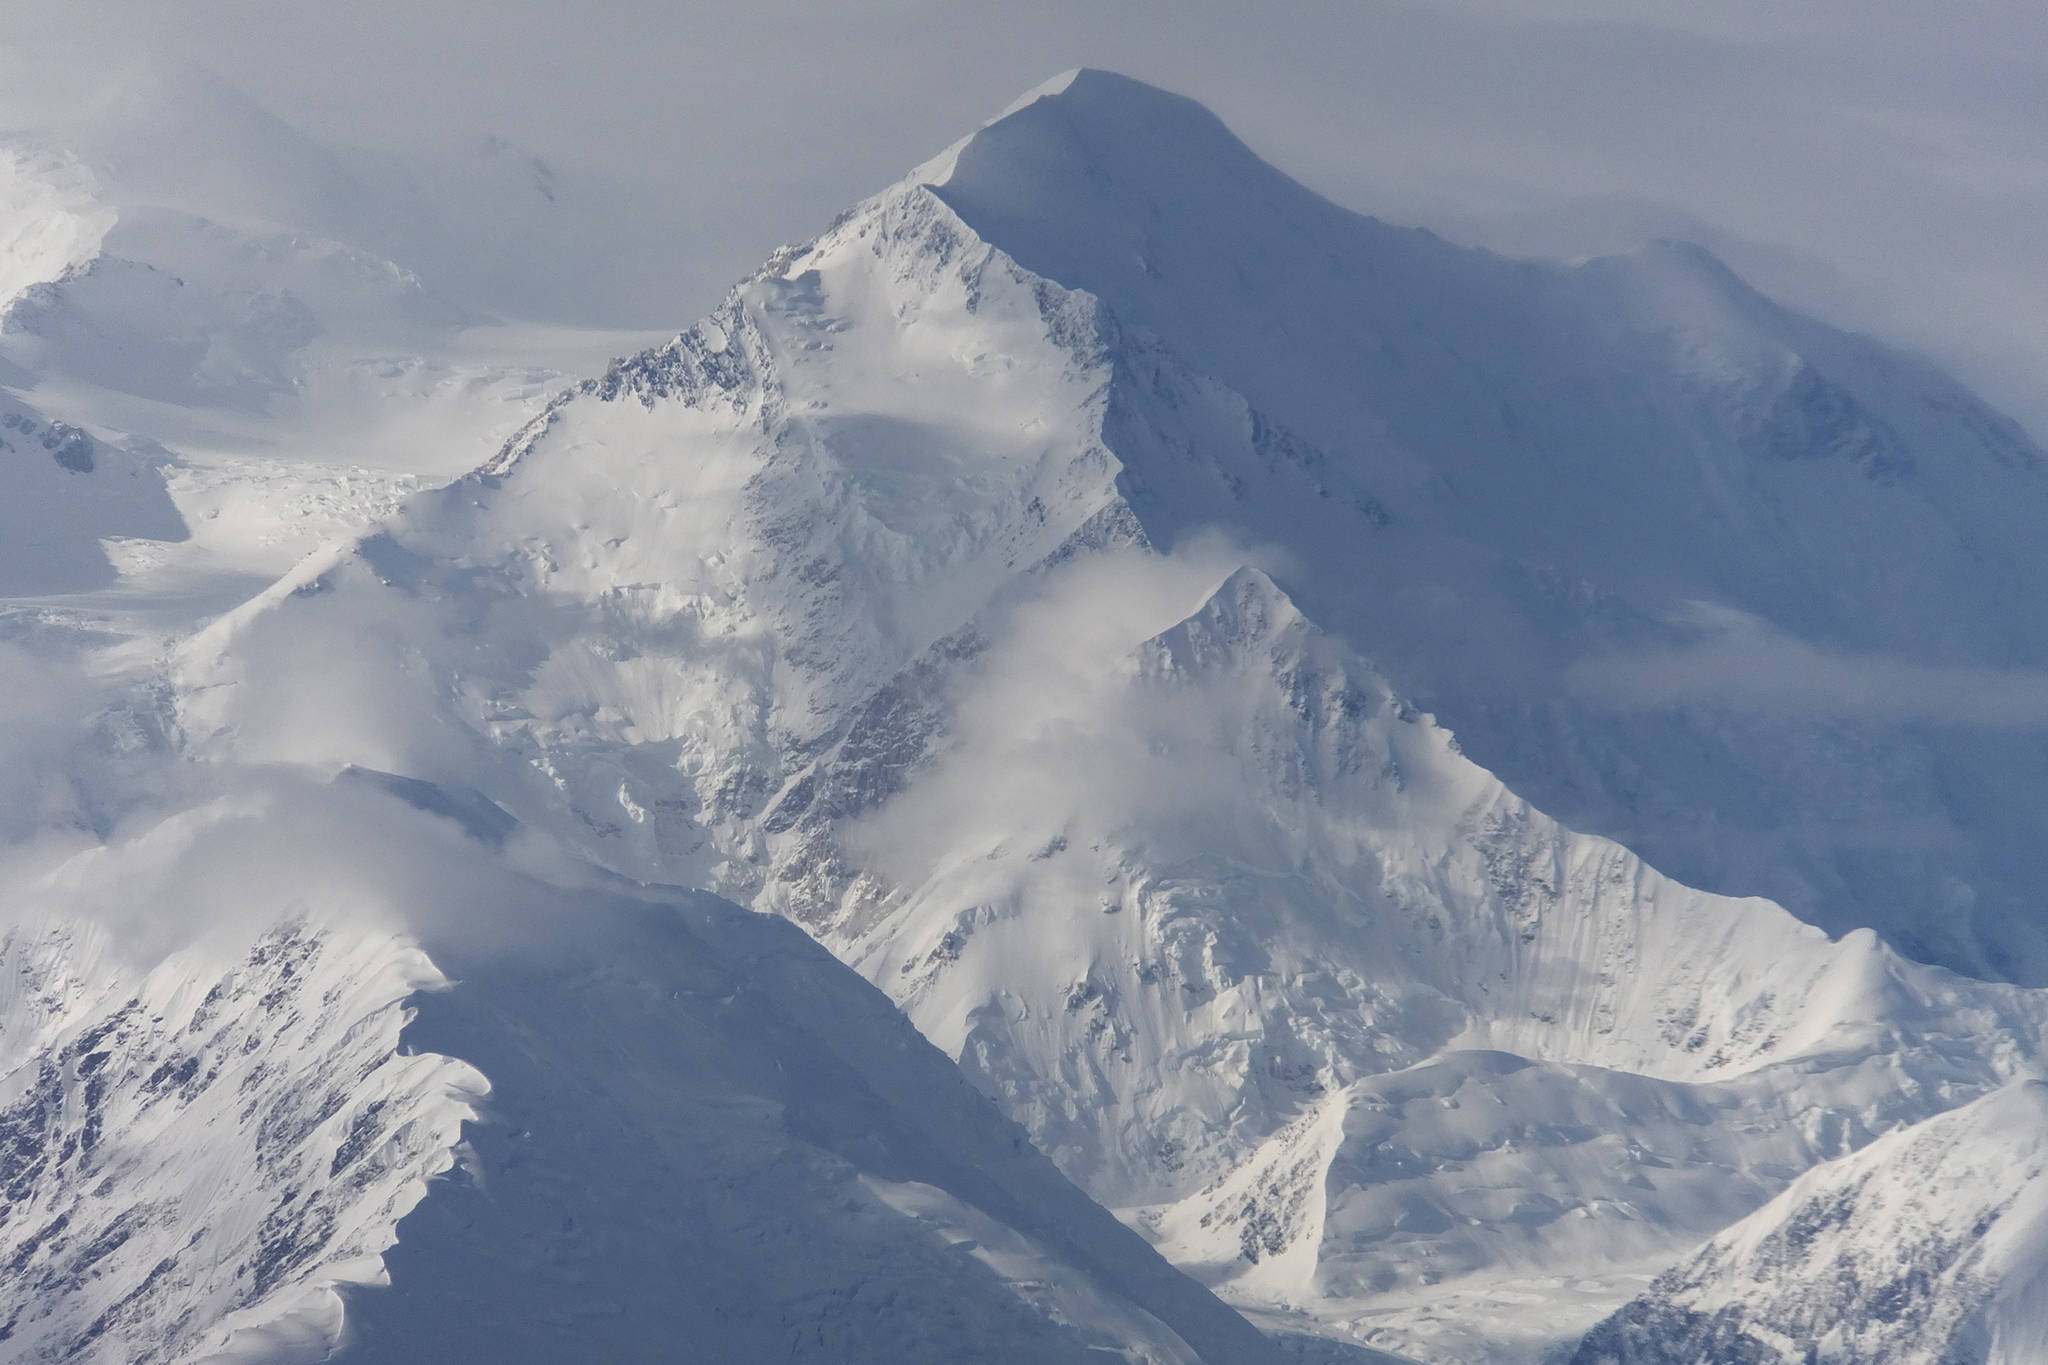 This photo shows a view of one of the faces of North America’s tallest peak, then-named Mount McKinley, in Denali National Park and Preserve, Alaska. Rangers who keep an eye on North America’s highest mountain peak say they are seeing impatient and inexperienced climbers take more risks and put their lives and other climbers in danger In 2021. (AP Photo / Becky Bohrer)